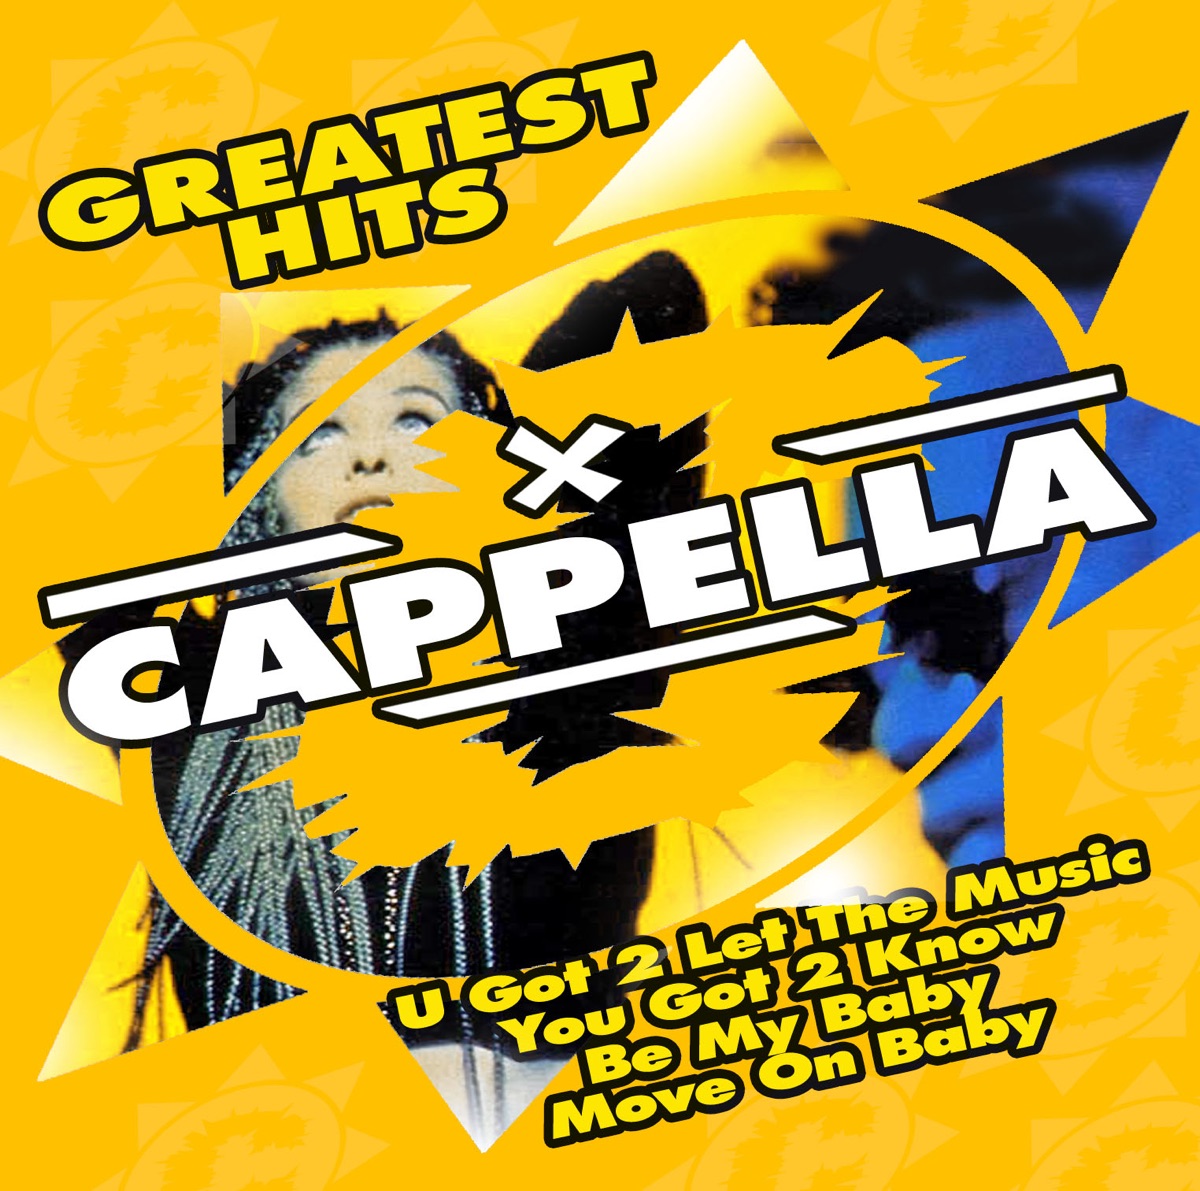 Greatest Hits by Cappella on Apple Music